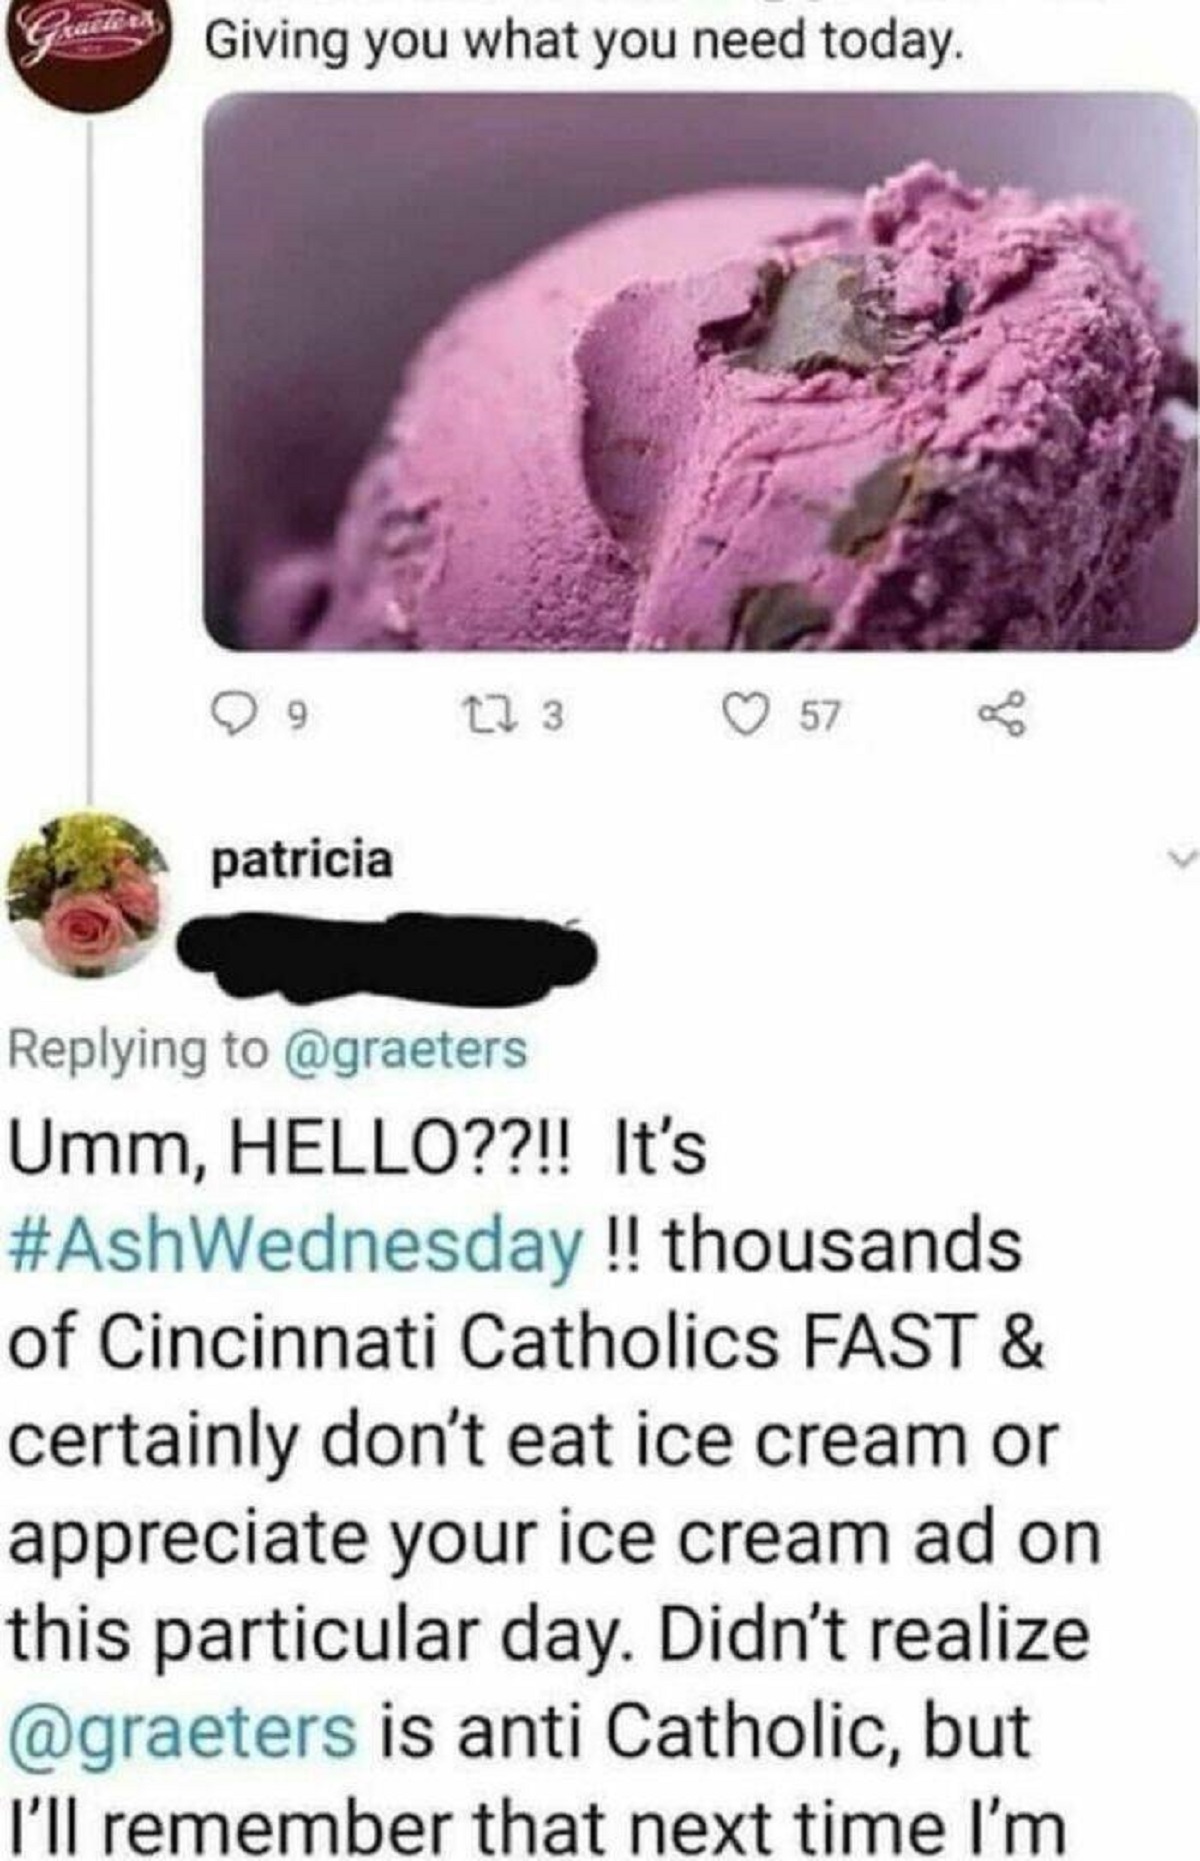 want to settle down meme - GGiving you what you need today. 9 27 3 57 patricia Umm, Hello??!! It's !! thousands of Cincinnati Catholics Fast & certainly don't eat ice cream or appreciate your ice cream ad on this particular day. Didn't realize is anti Cat